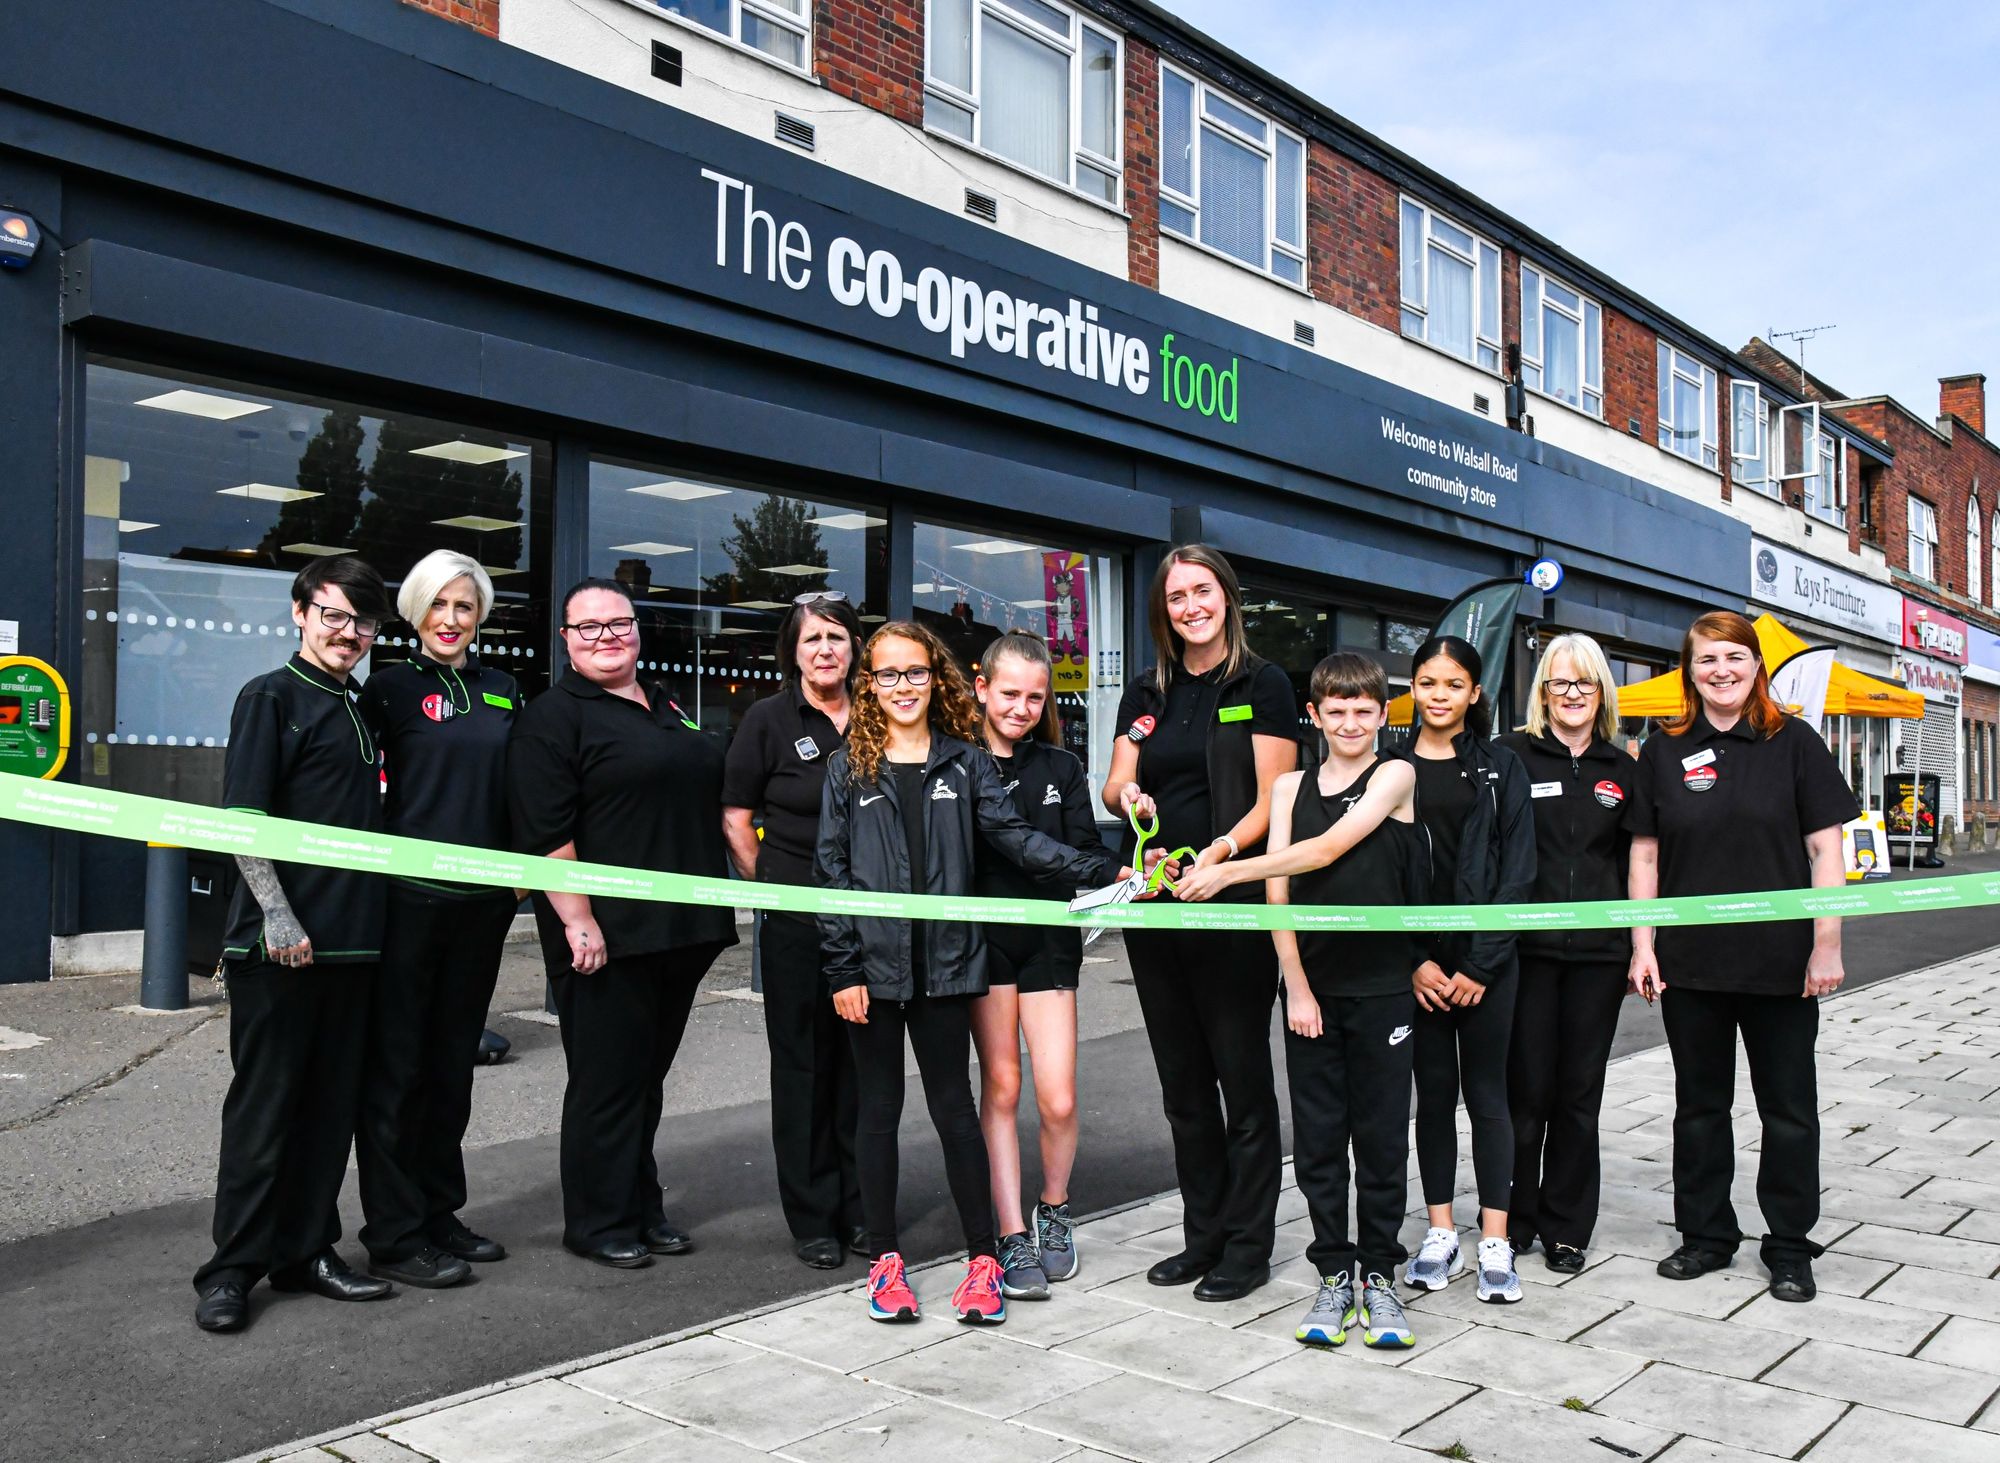 Young athletes cut ribbon on transformed food store close to Commonwealth Games stadium